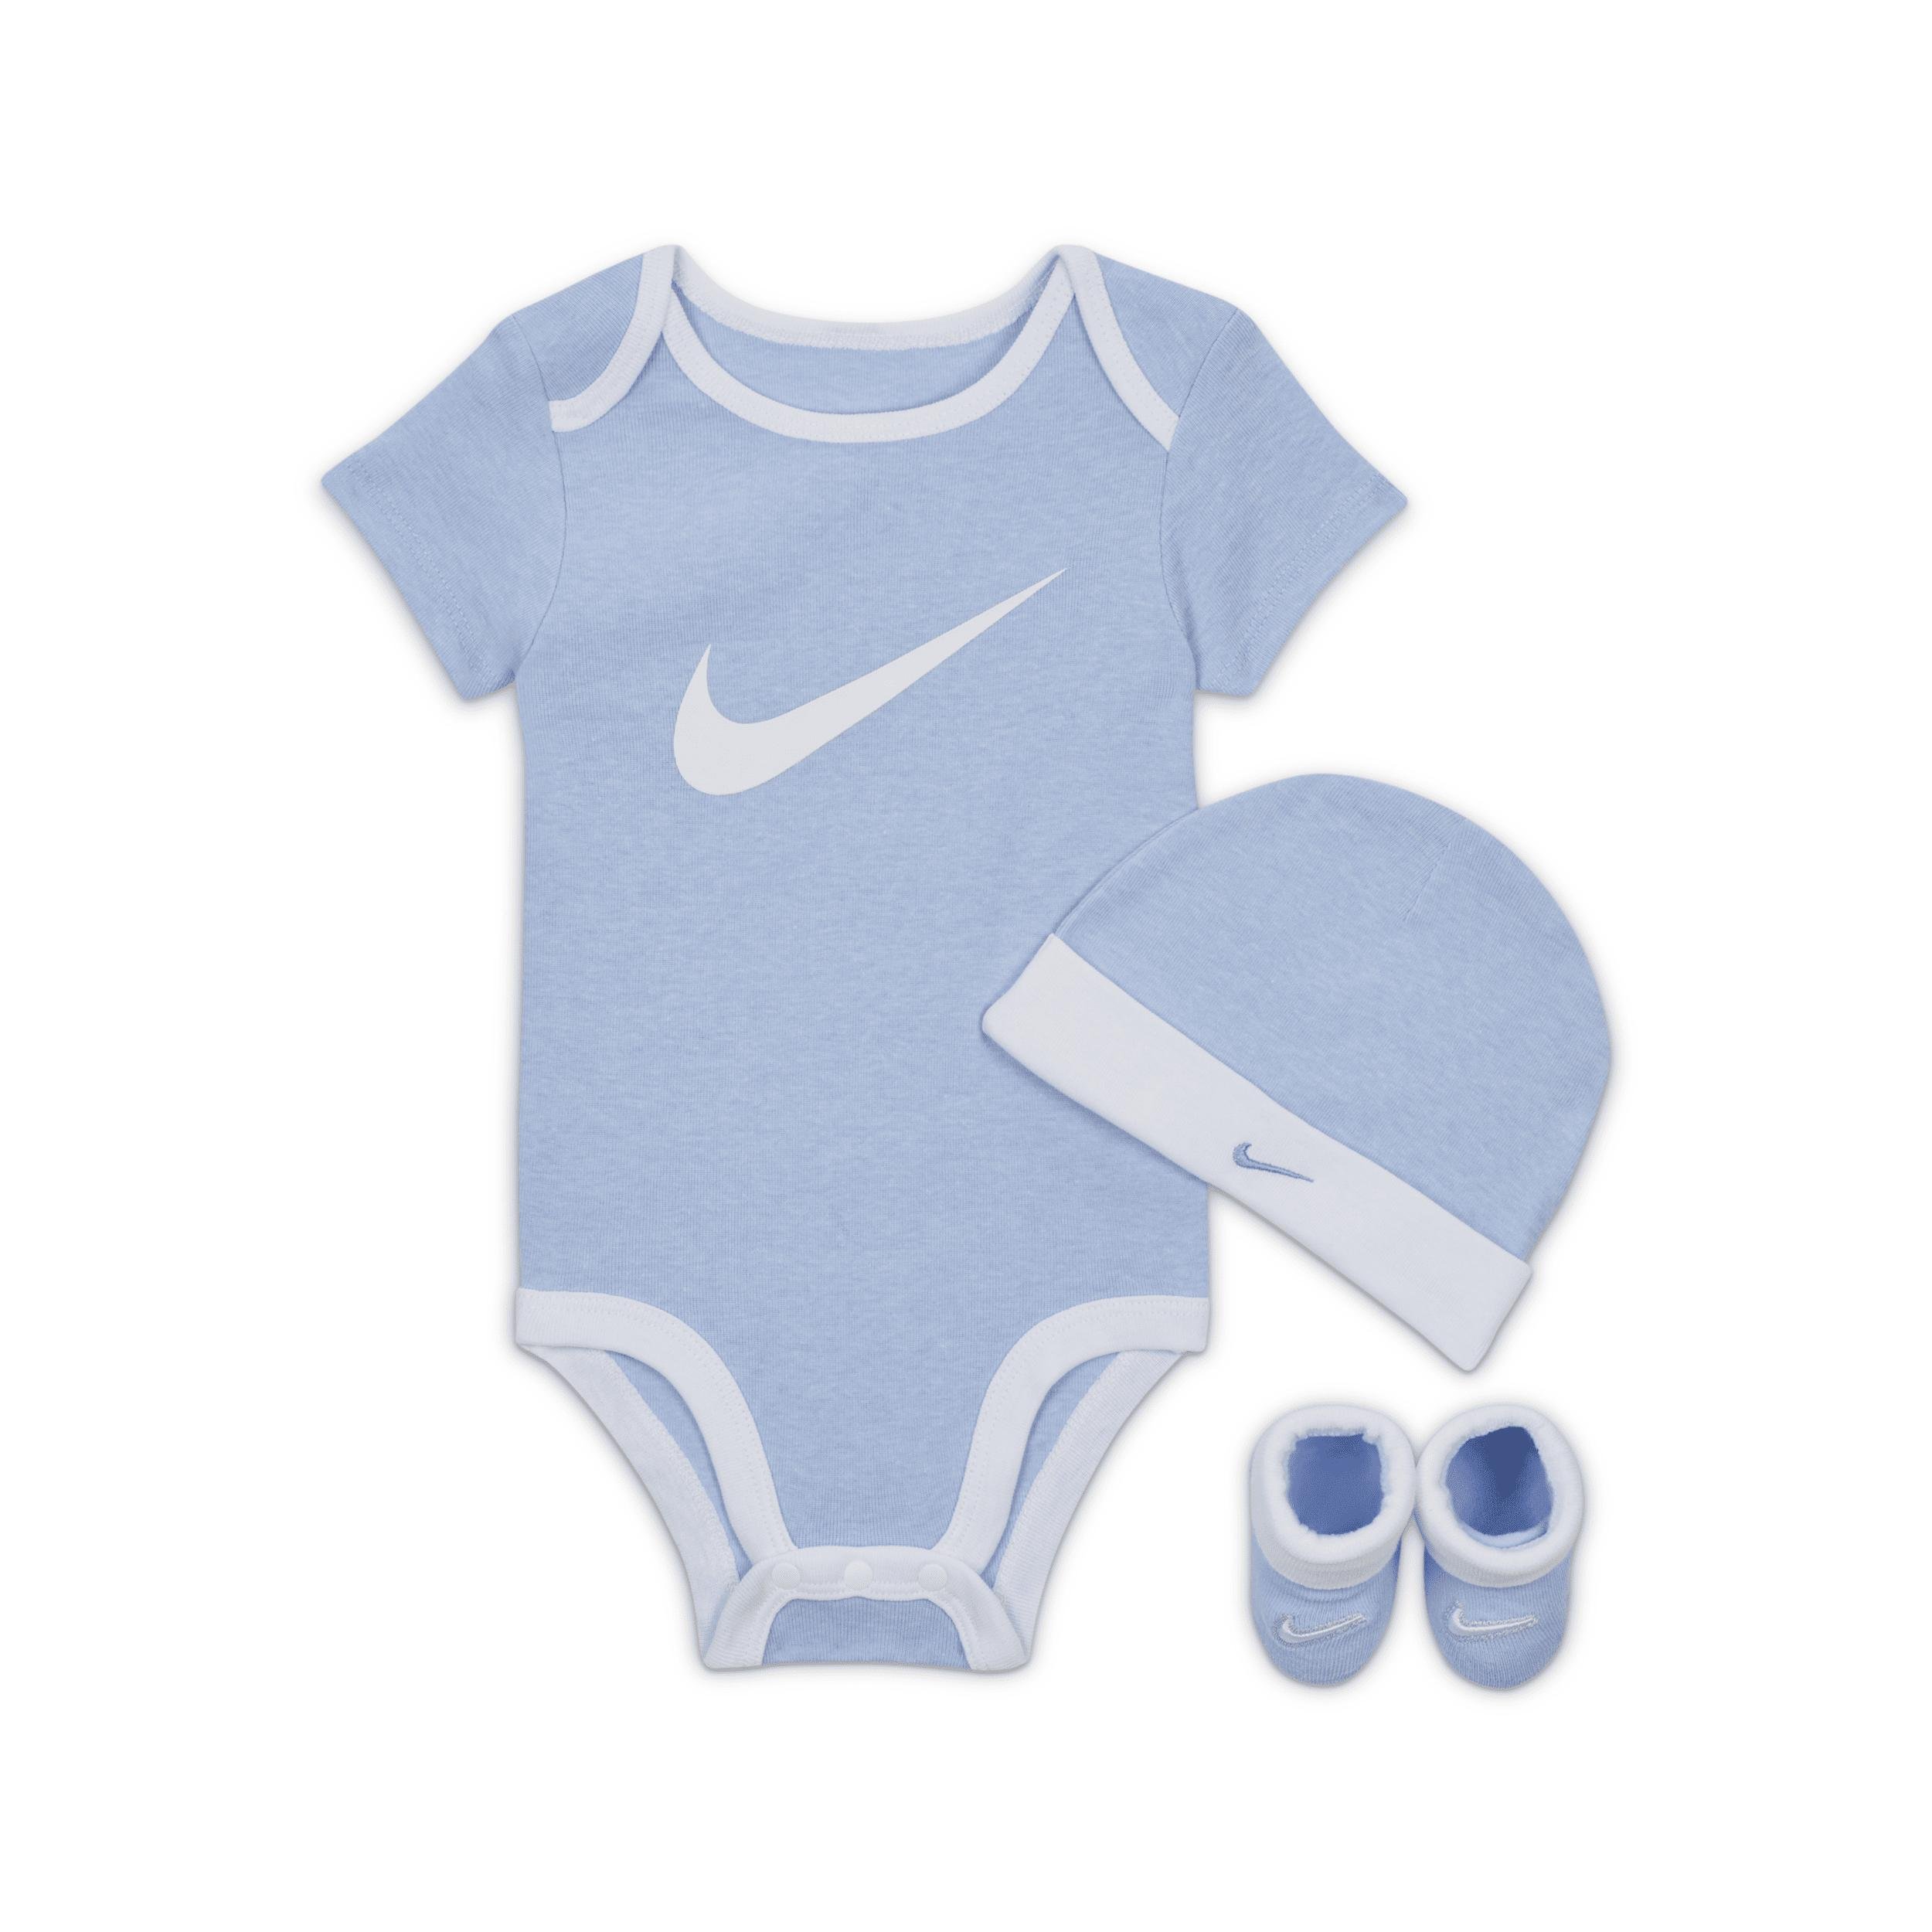 Nike Baby (6-12M) Bodysuit, Hat and Booties Box Set by NIKE